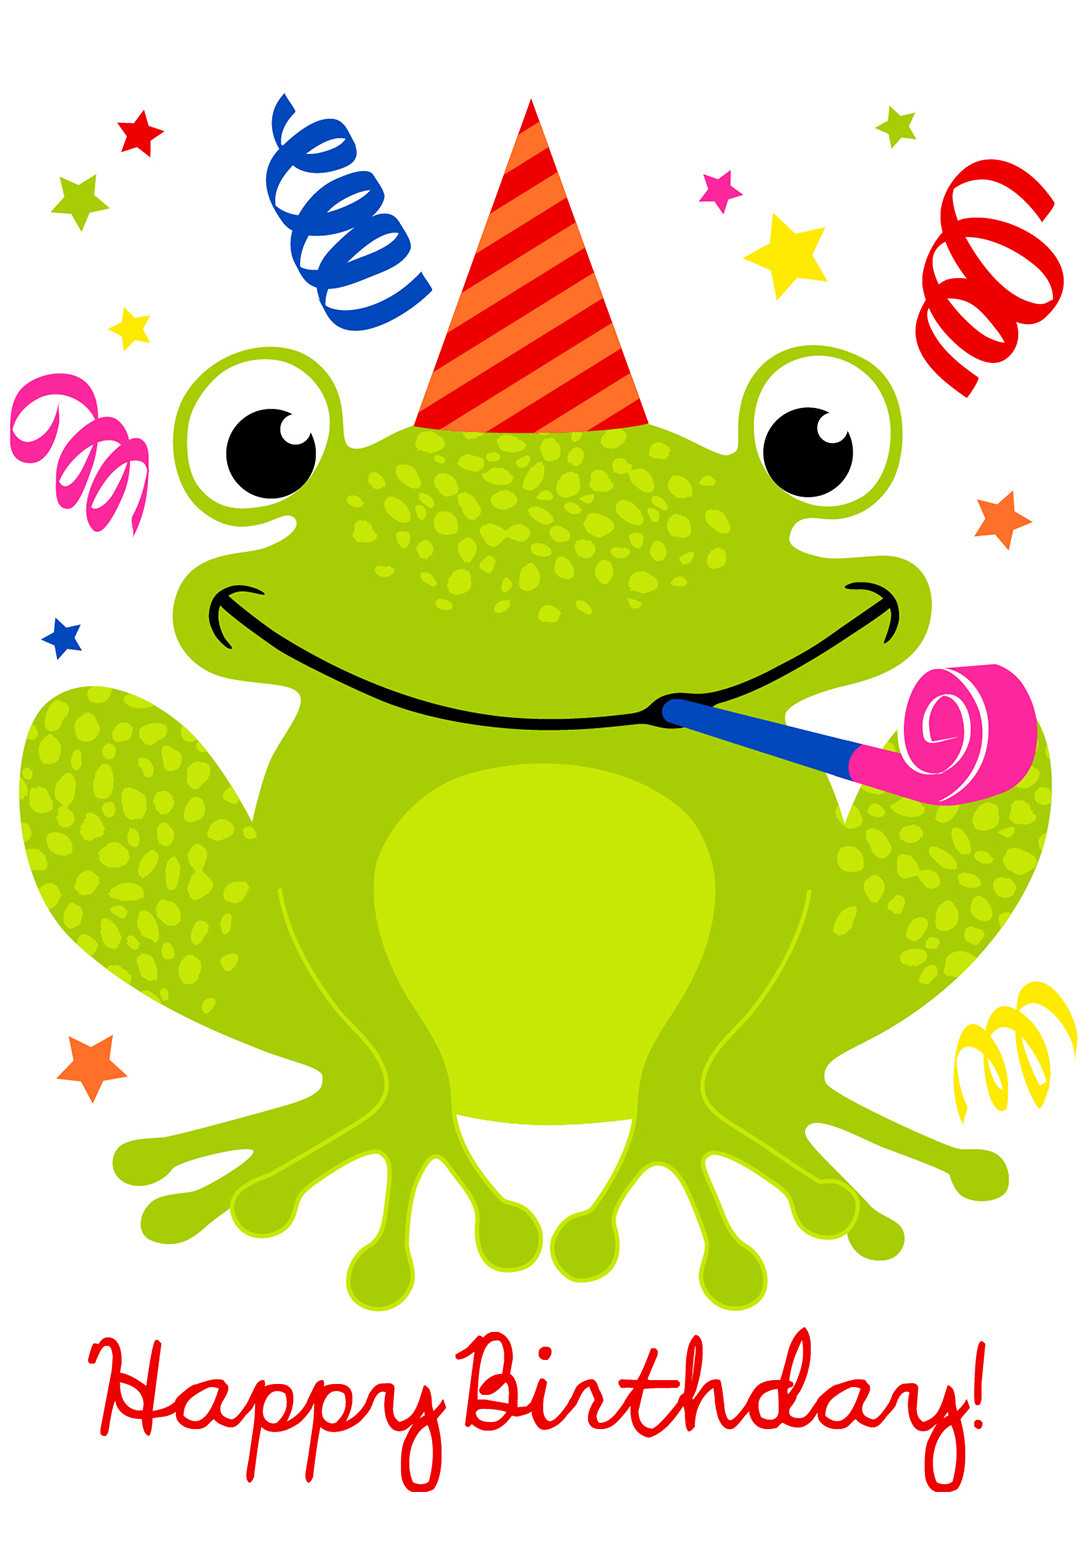 Printable Birthday Cards For Kids
 Cute Smiling Frog Birthday Card